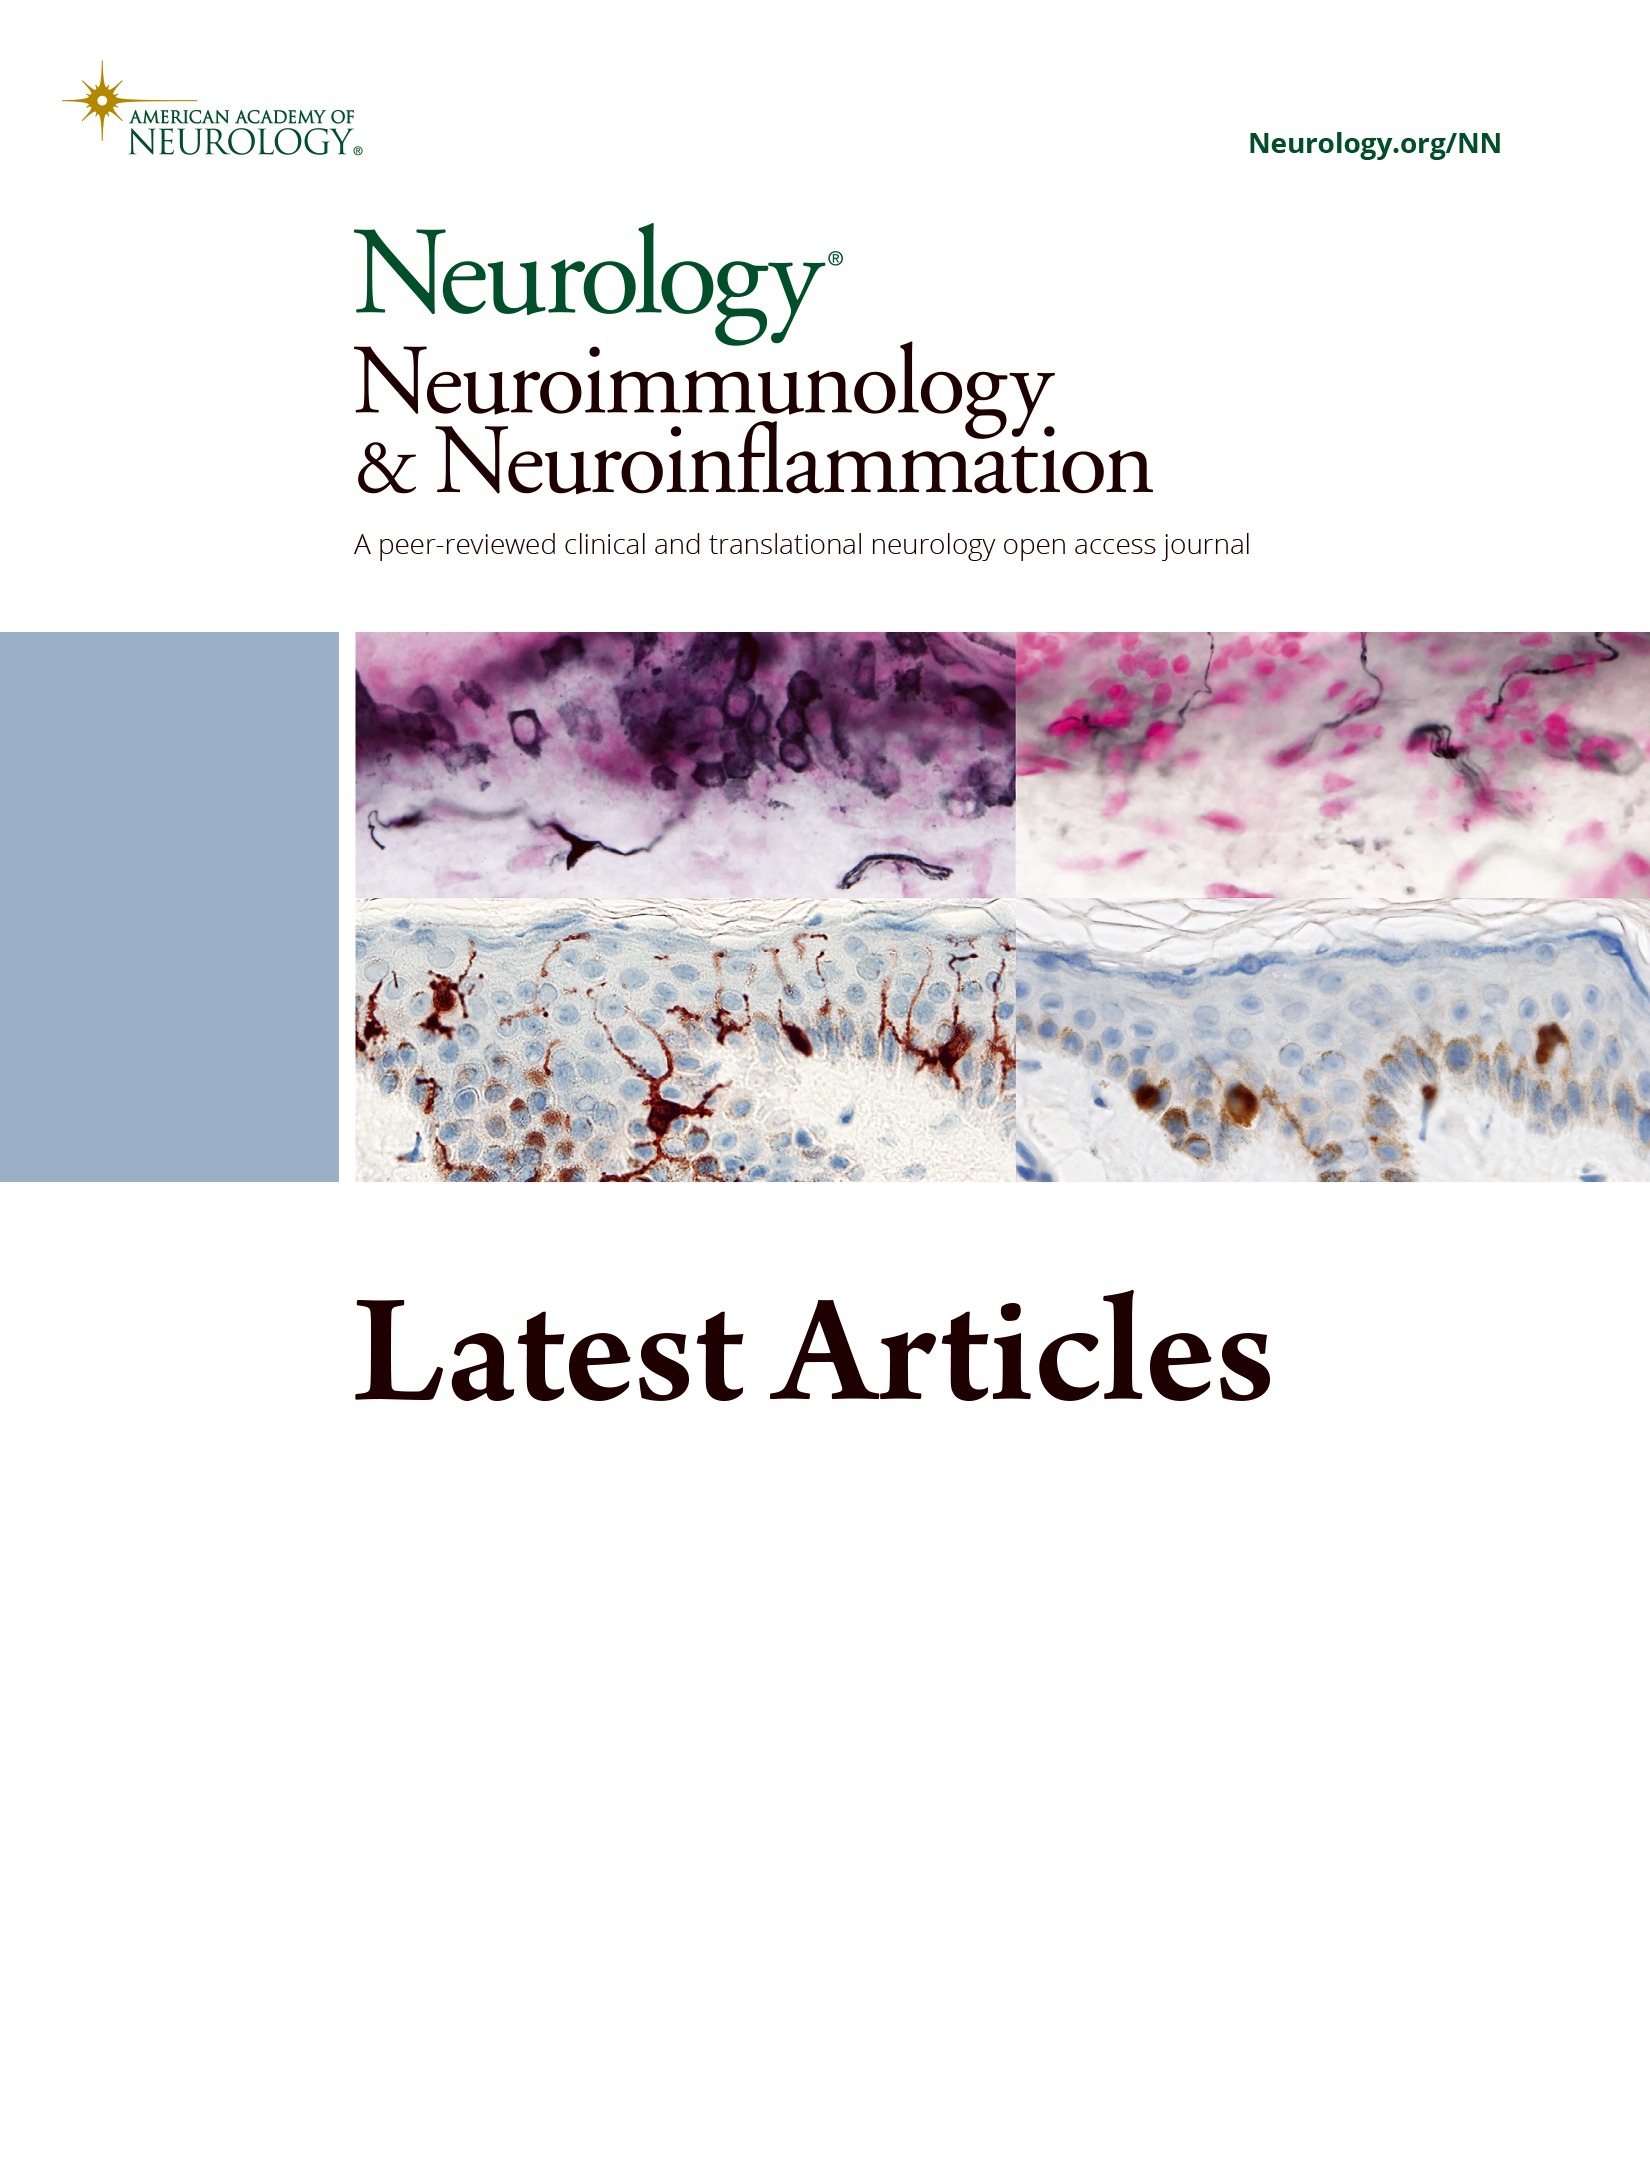 Neuroaxonal and Glial Markers in Patients of the Same Age With Multiple Sclerosis